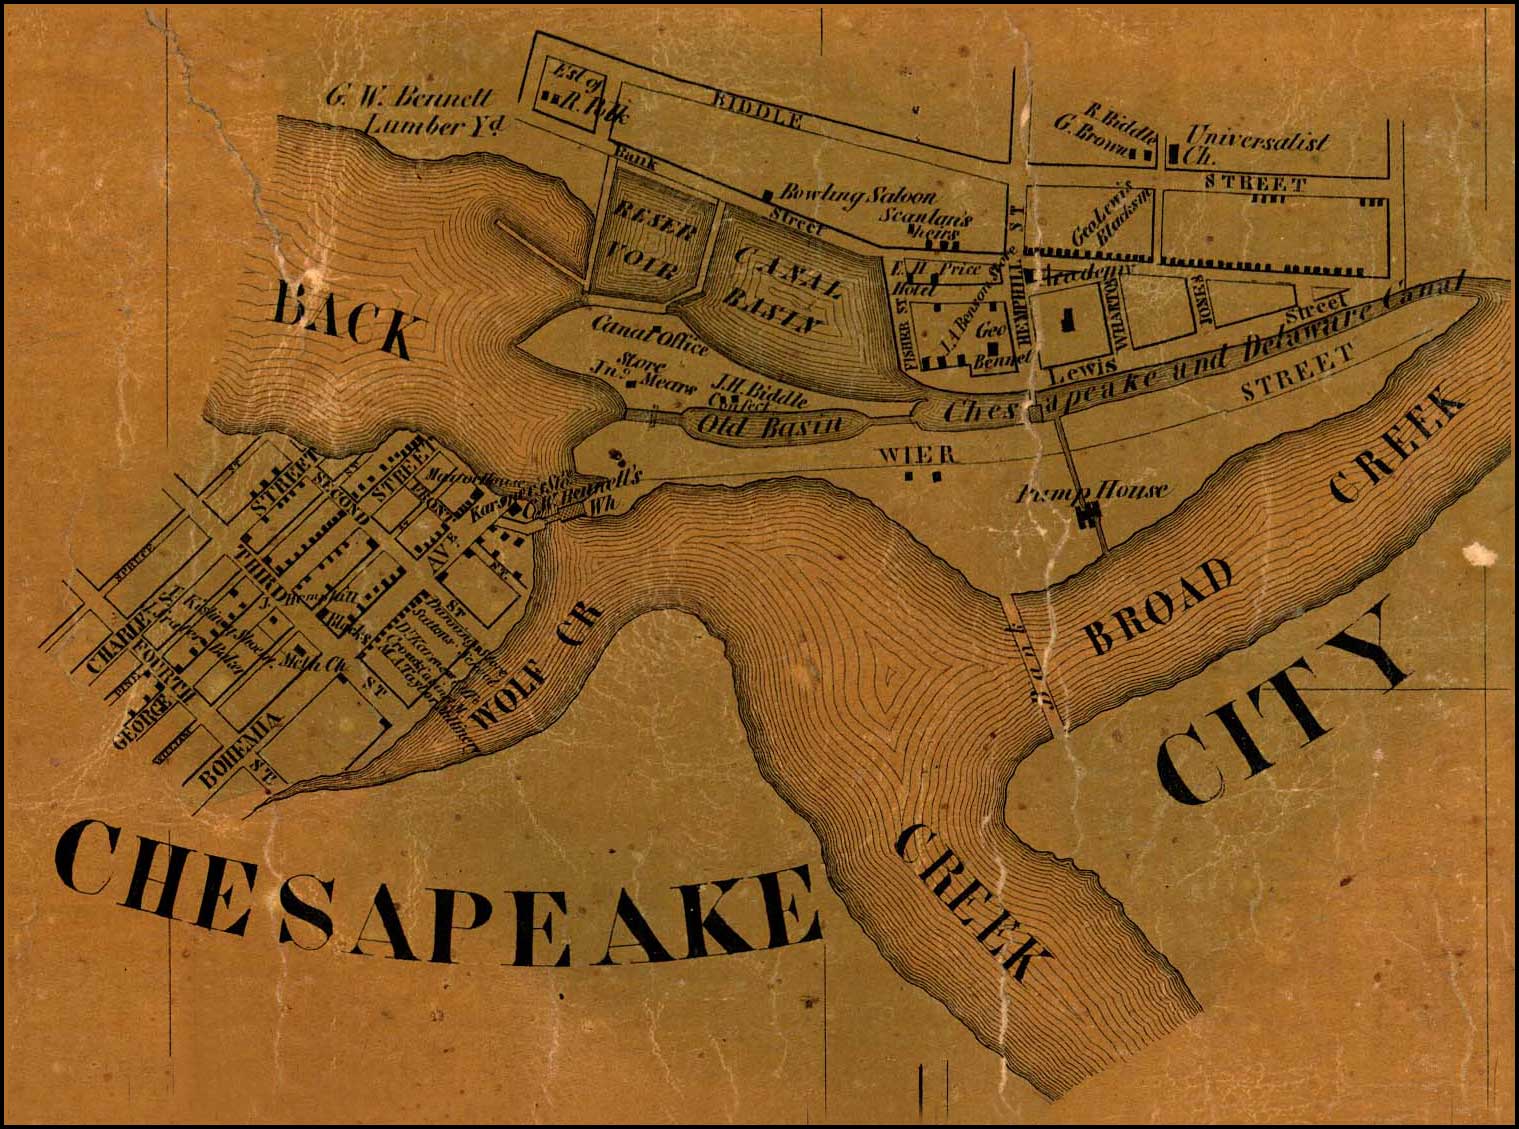 Detail of Chesapeake City from Simon J. Martenet, Map of Cecil County, 1858, Library of Congress, MSA SC 1213-1-462